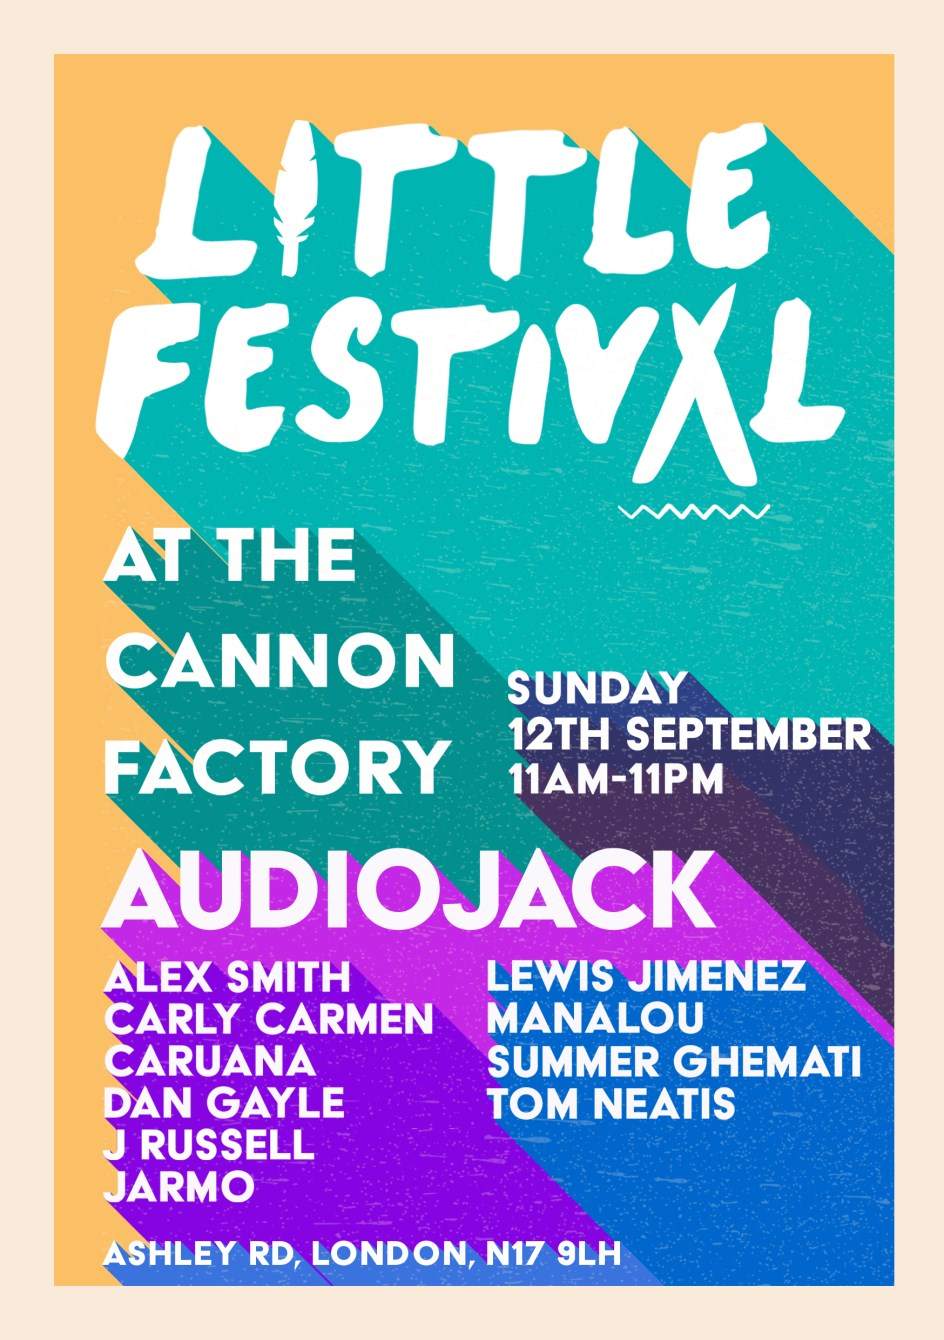 Little Festival Open Air Courtyard & Warehouse Party ft Audiojack - Tickets On The Door - フライヤー表